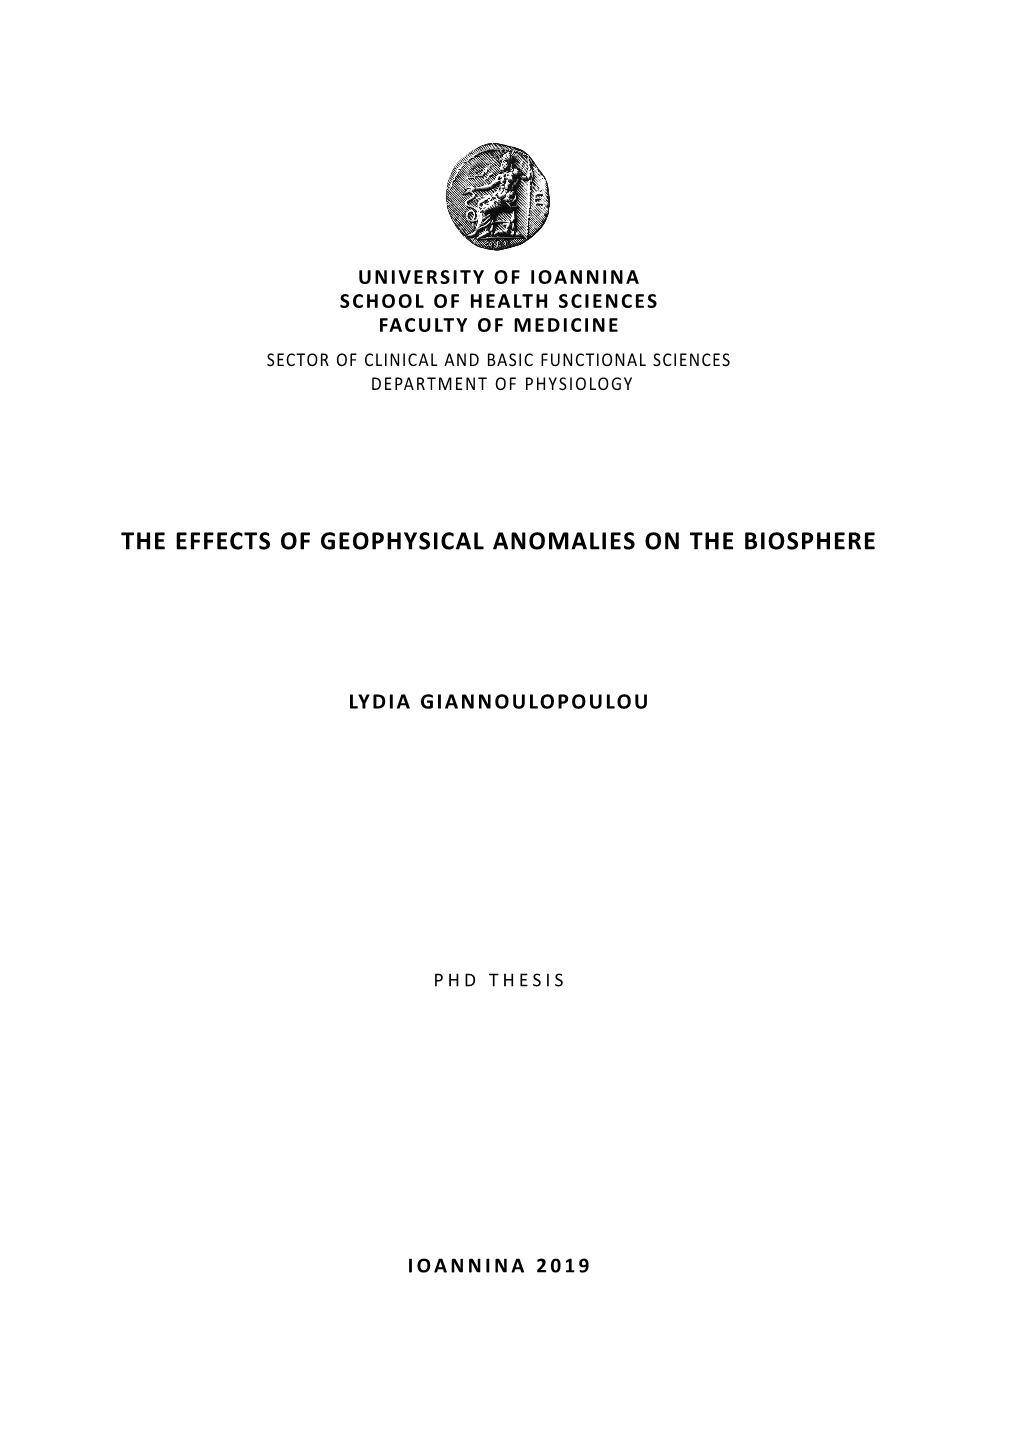 The Effects of Geophysical Anomalies on the Biosphere